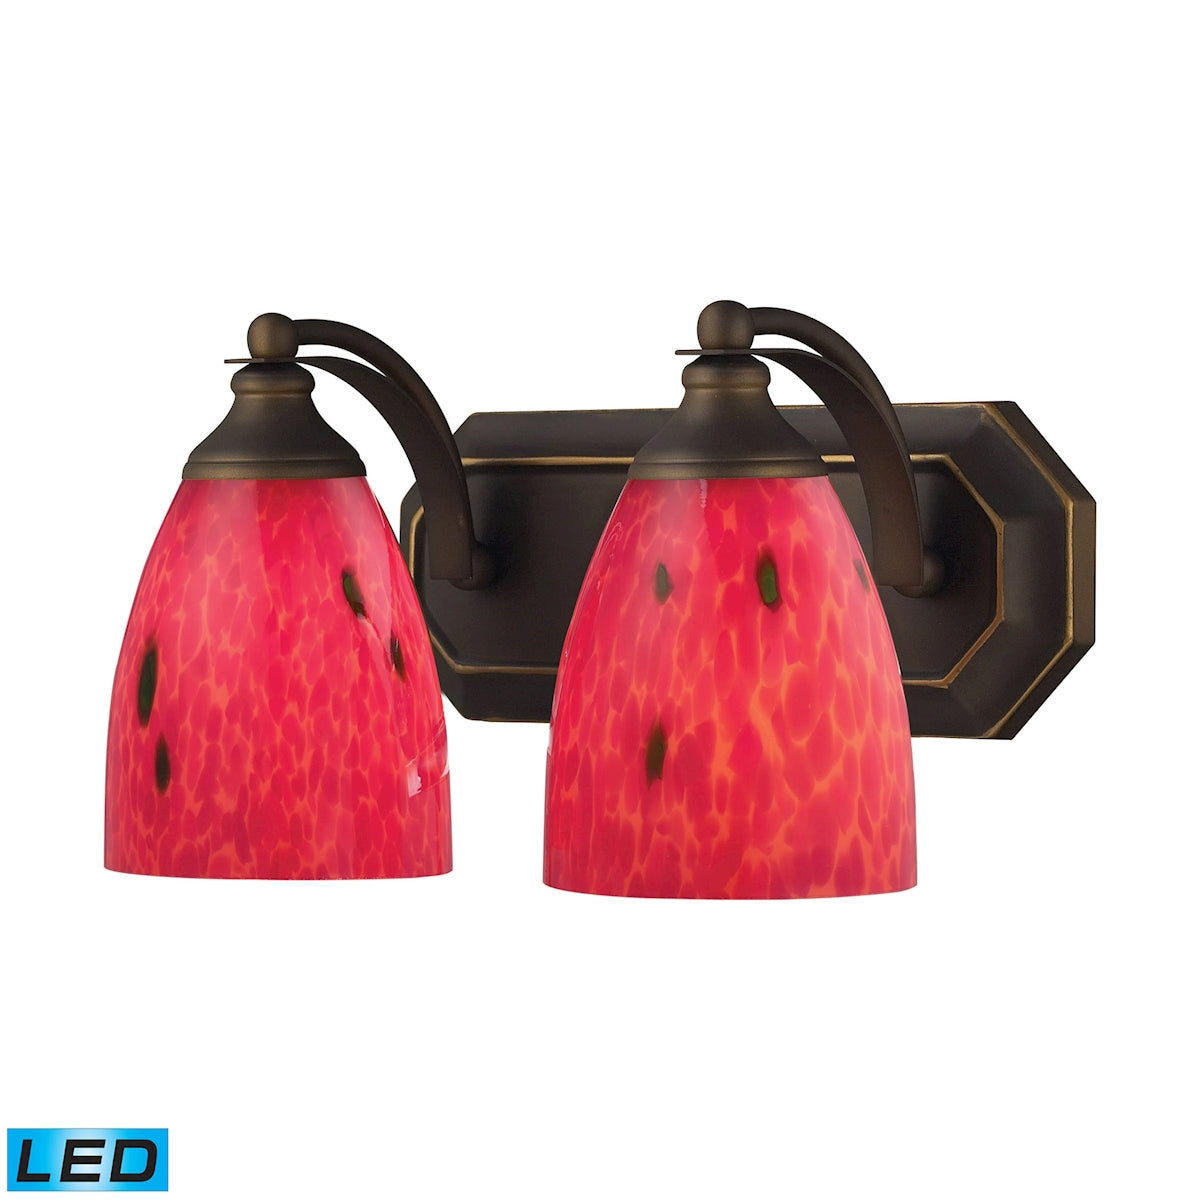 ELK Lighting 570-2B-FR-LED Mix-N-Match Vanity 2-Light Wall Lamp in Aged Bronze with Fire Red Glass - Includes LED Bulbs